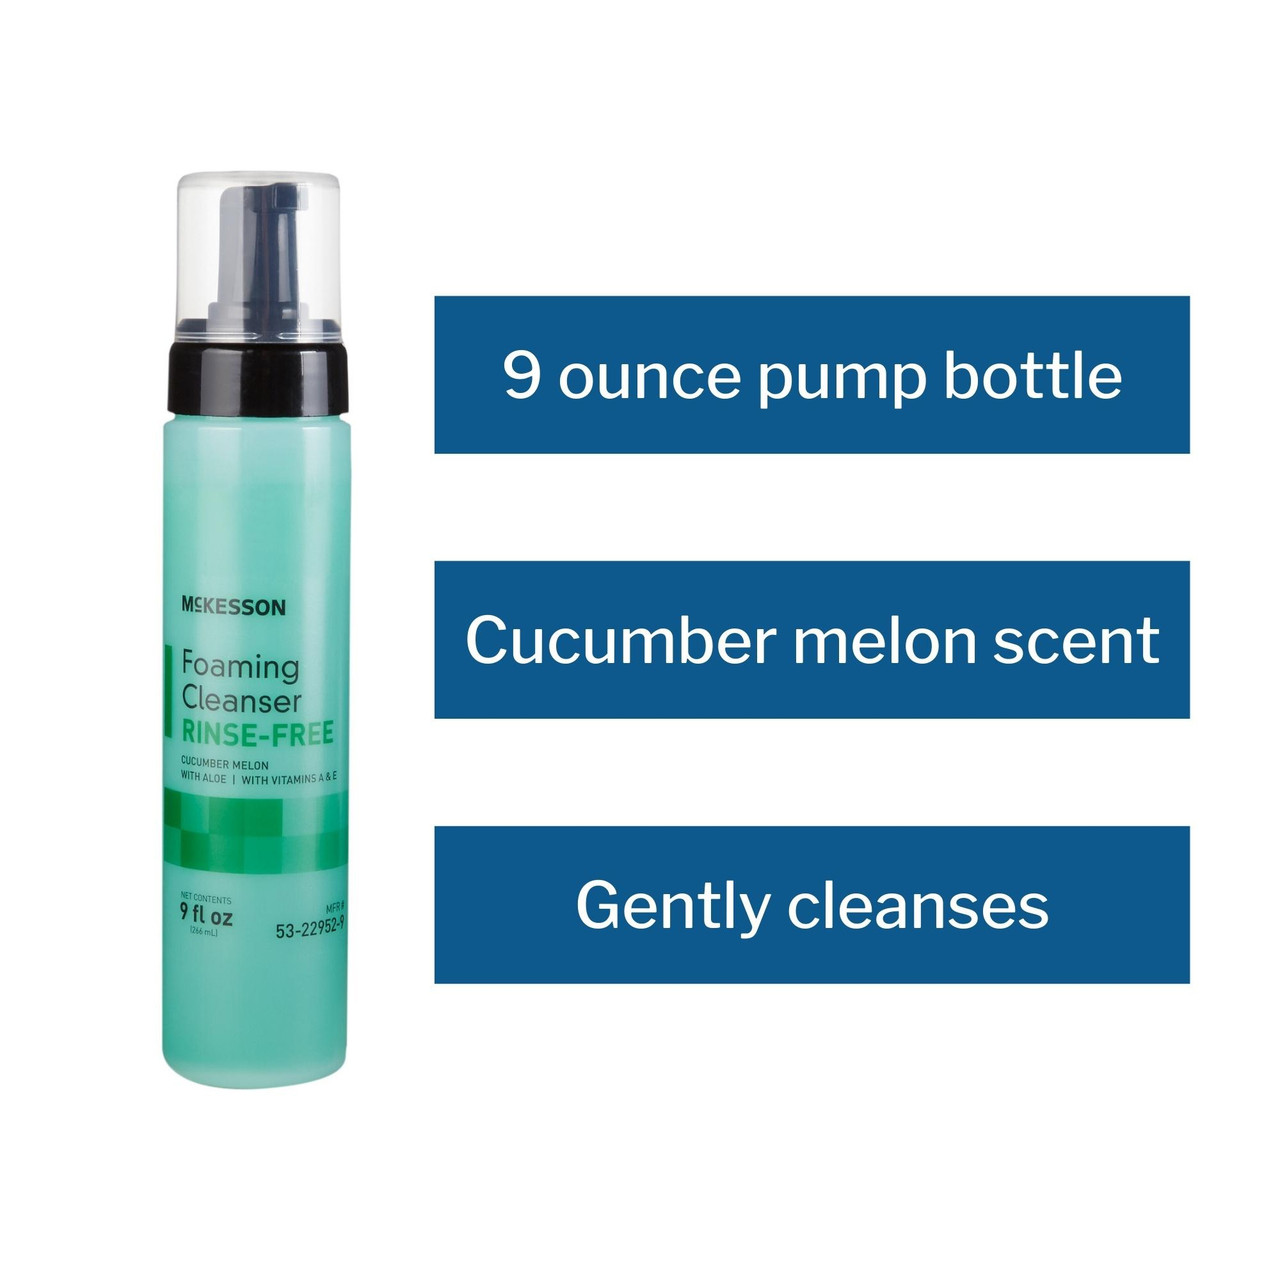 McKesson Perineal and Skin Cleanser, Rinse-Free - Fresh Scent - Simply  Medical